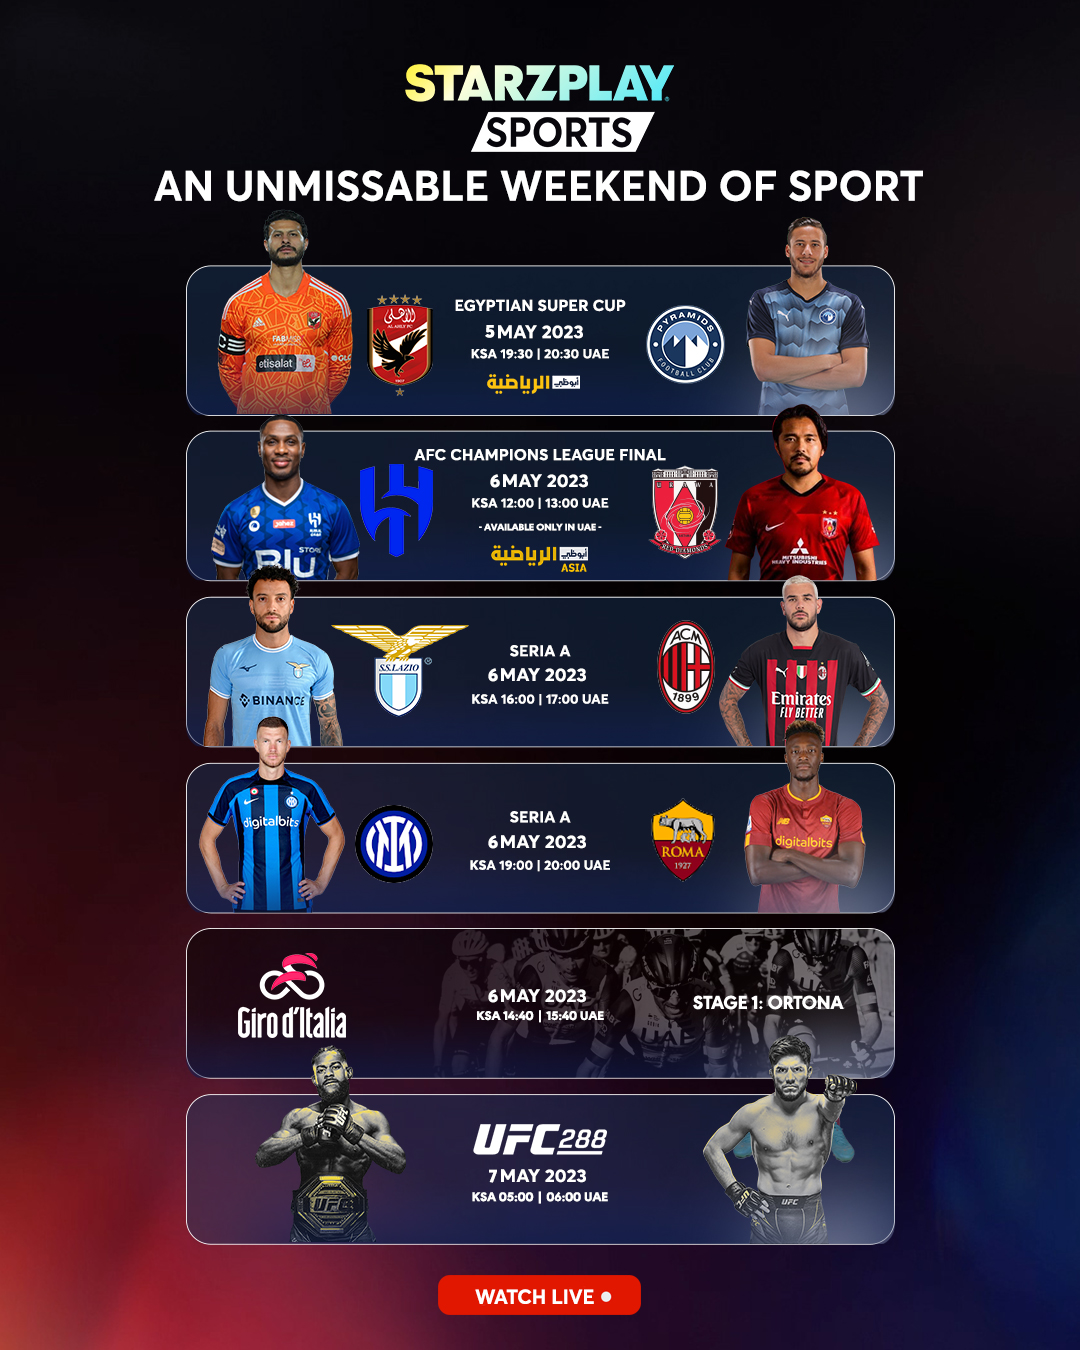 STARZPLAY Sports presents an unmissable weekend of live sport!